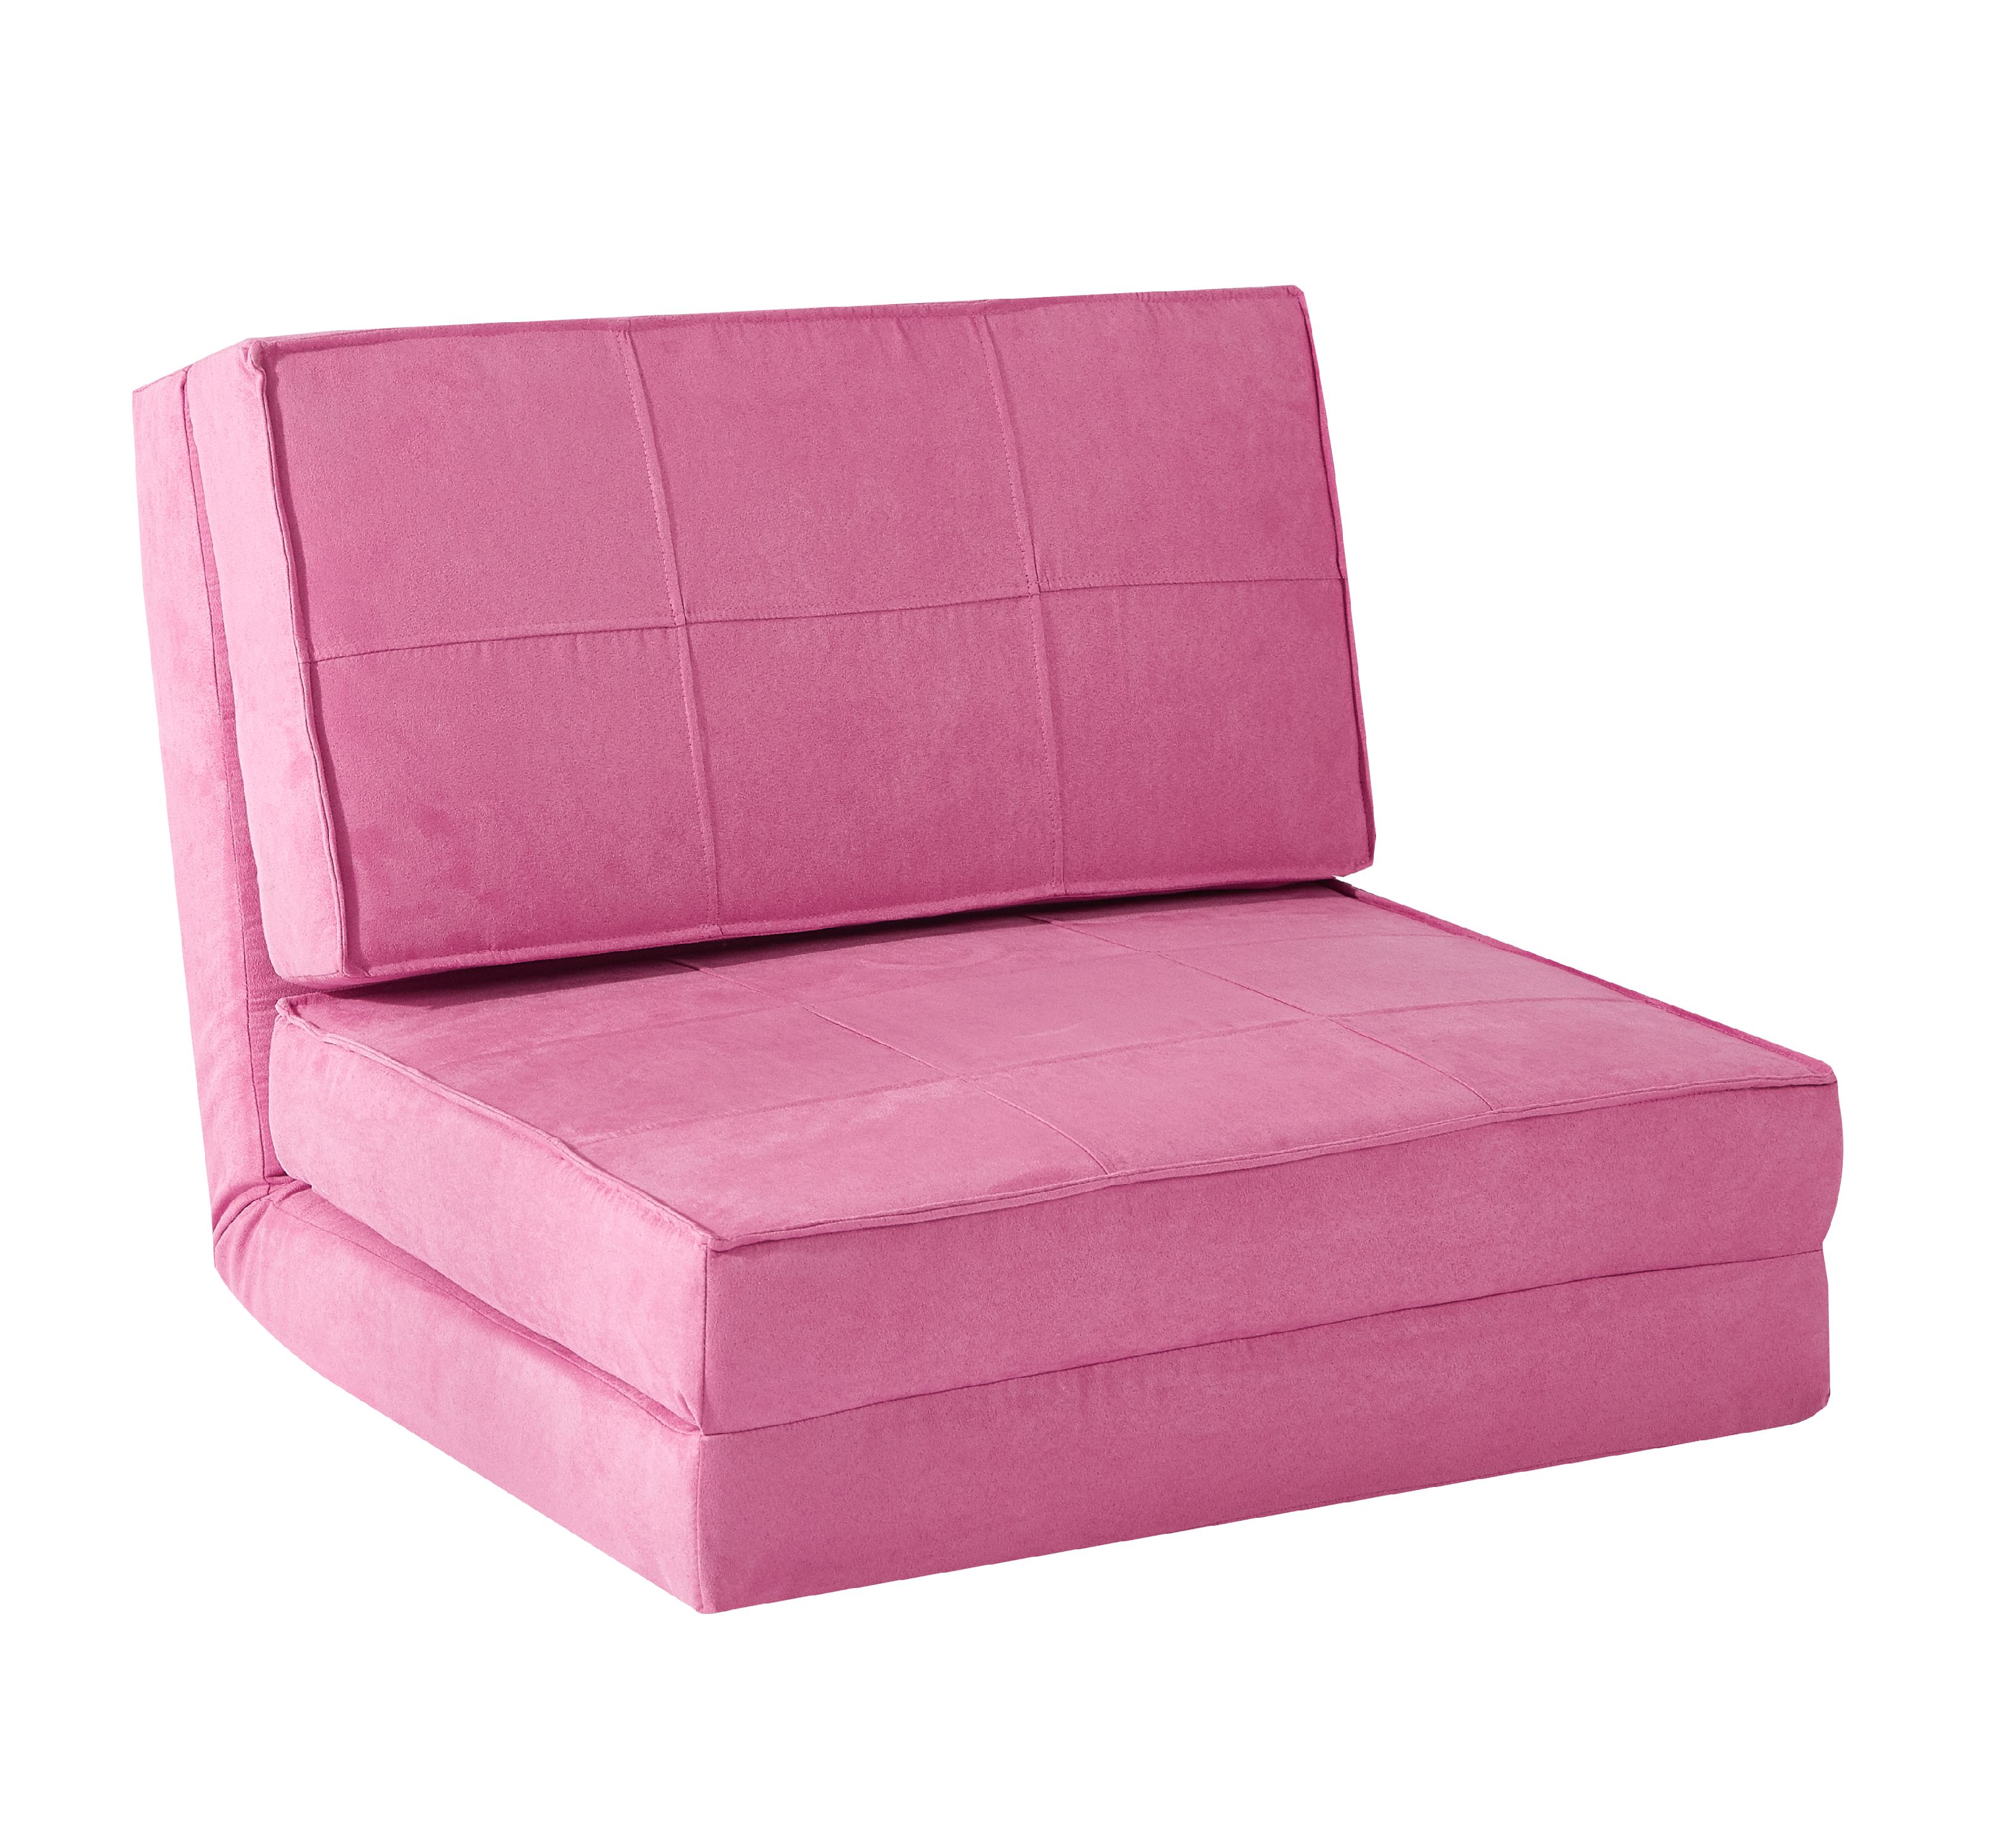 Your Zone Ultra Soft Suede 3 Position Convertible Flip Lounge Chair, Racy Pink - image 1 of 7